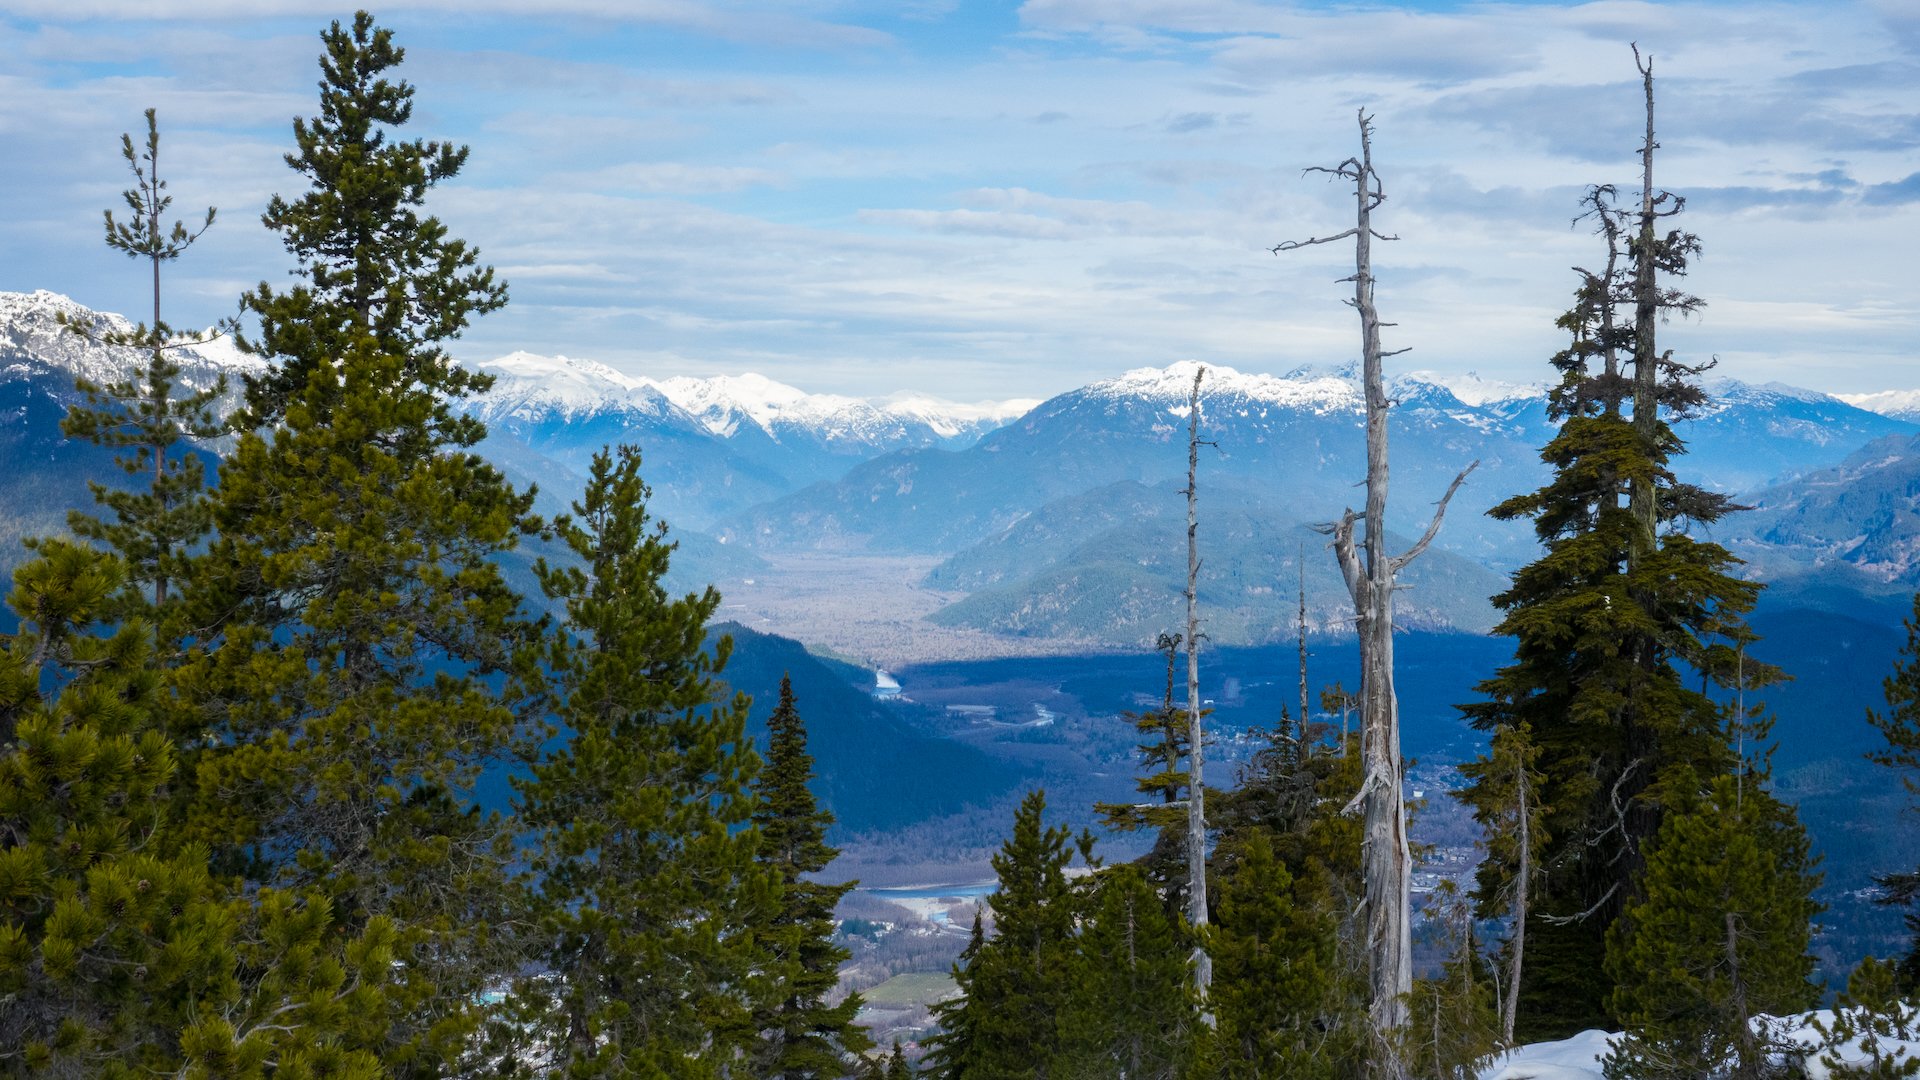  But the new view up into the Squamish Valley. It’s a very rugged place, with lots of wildlife. We need to go explore up there more. I’ve done it a few time, many years ago.  